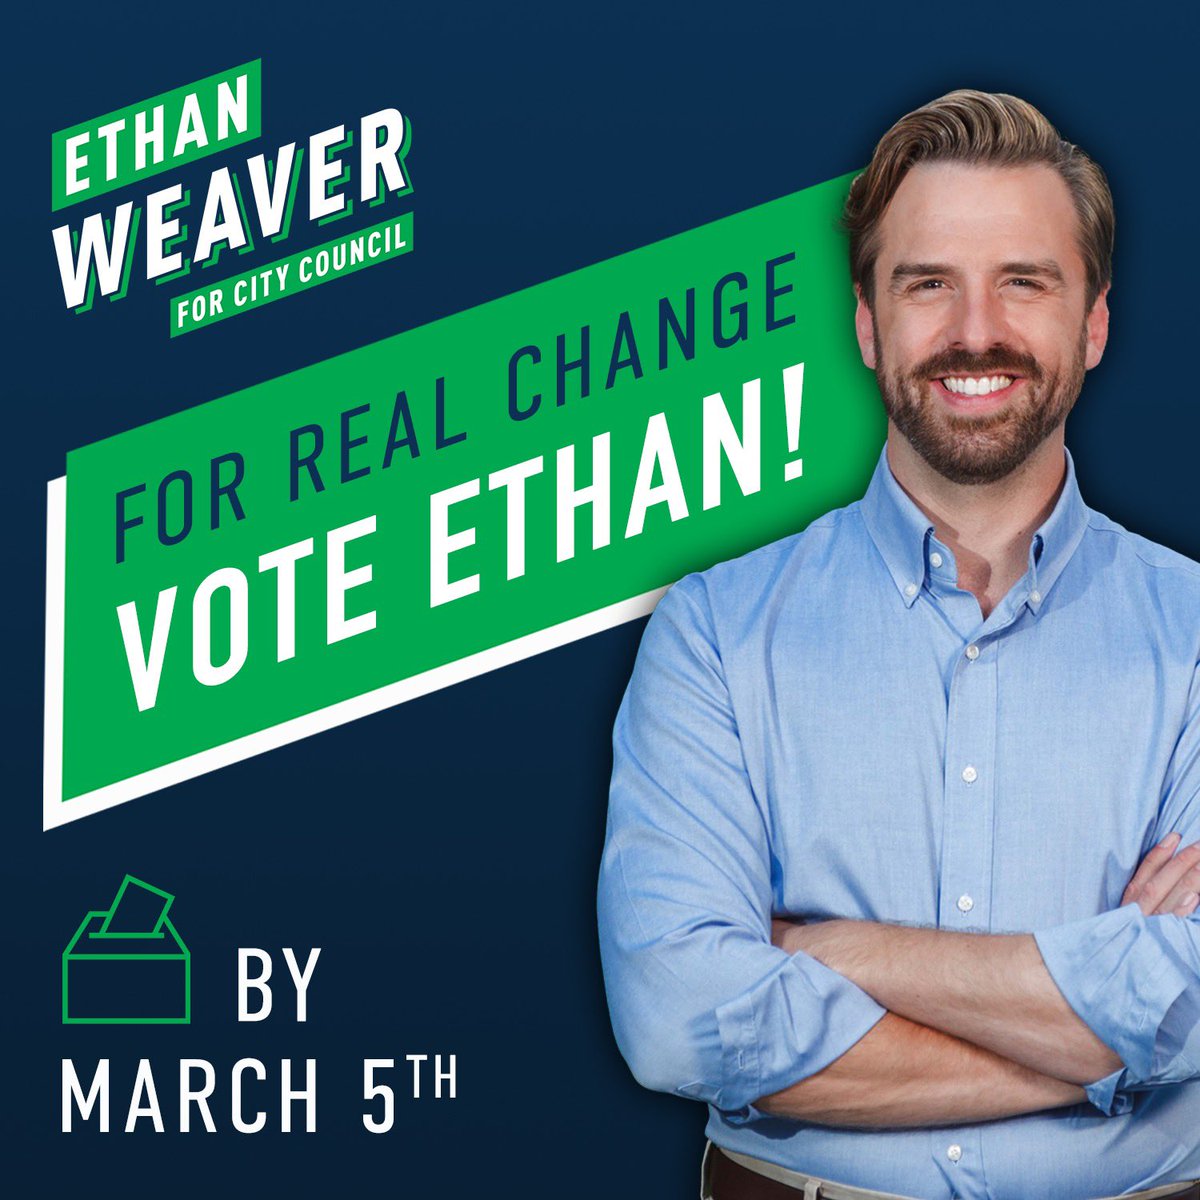 Election Day is finally here! Make sure to vote and remind your friends and neighbors to vote as well! This election will be decided by who actually shows up, so show up for your community!